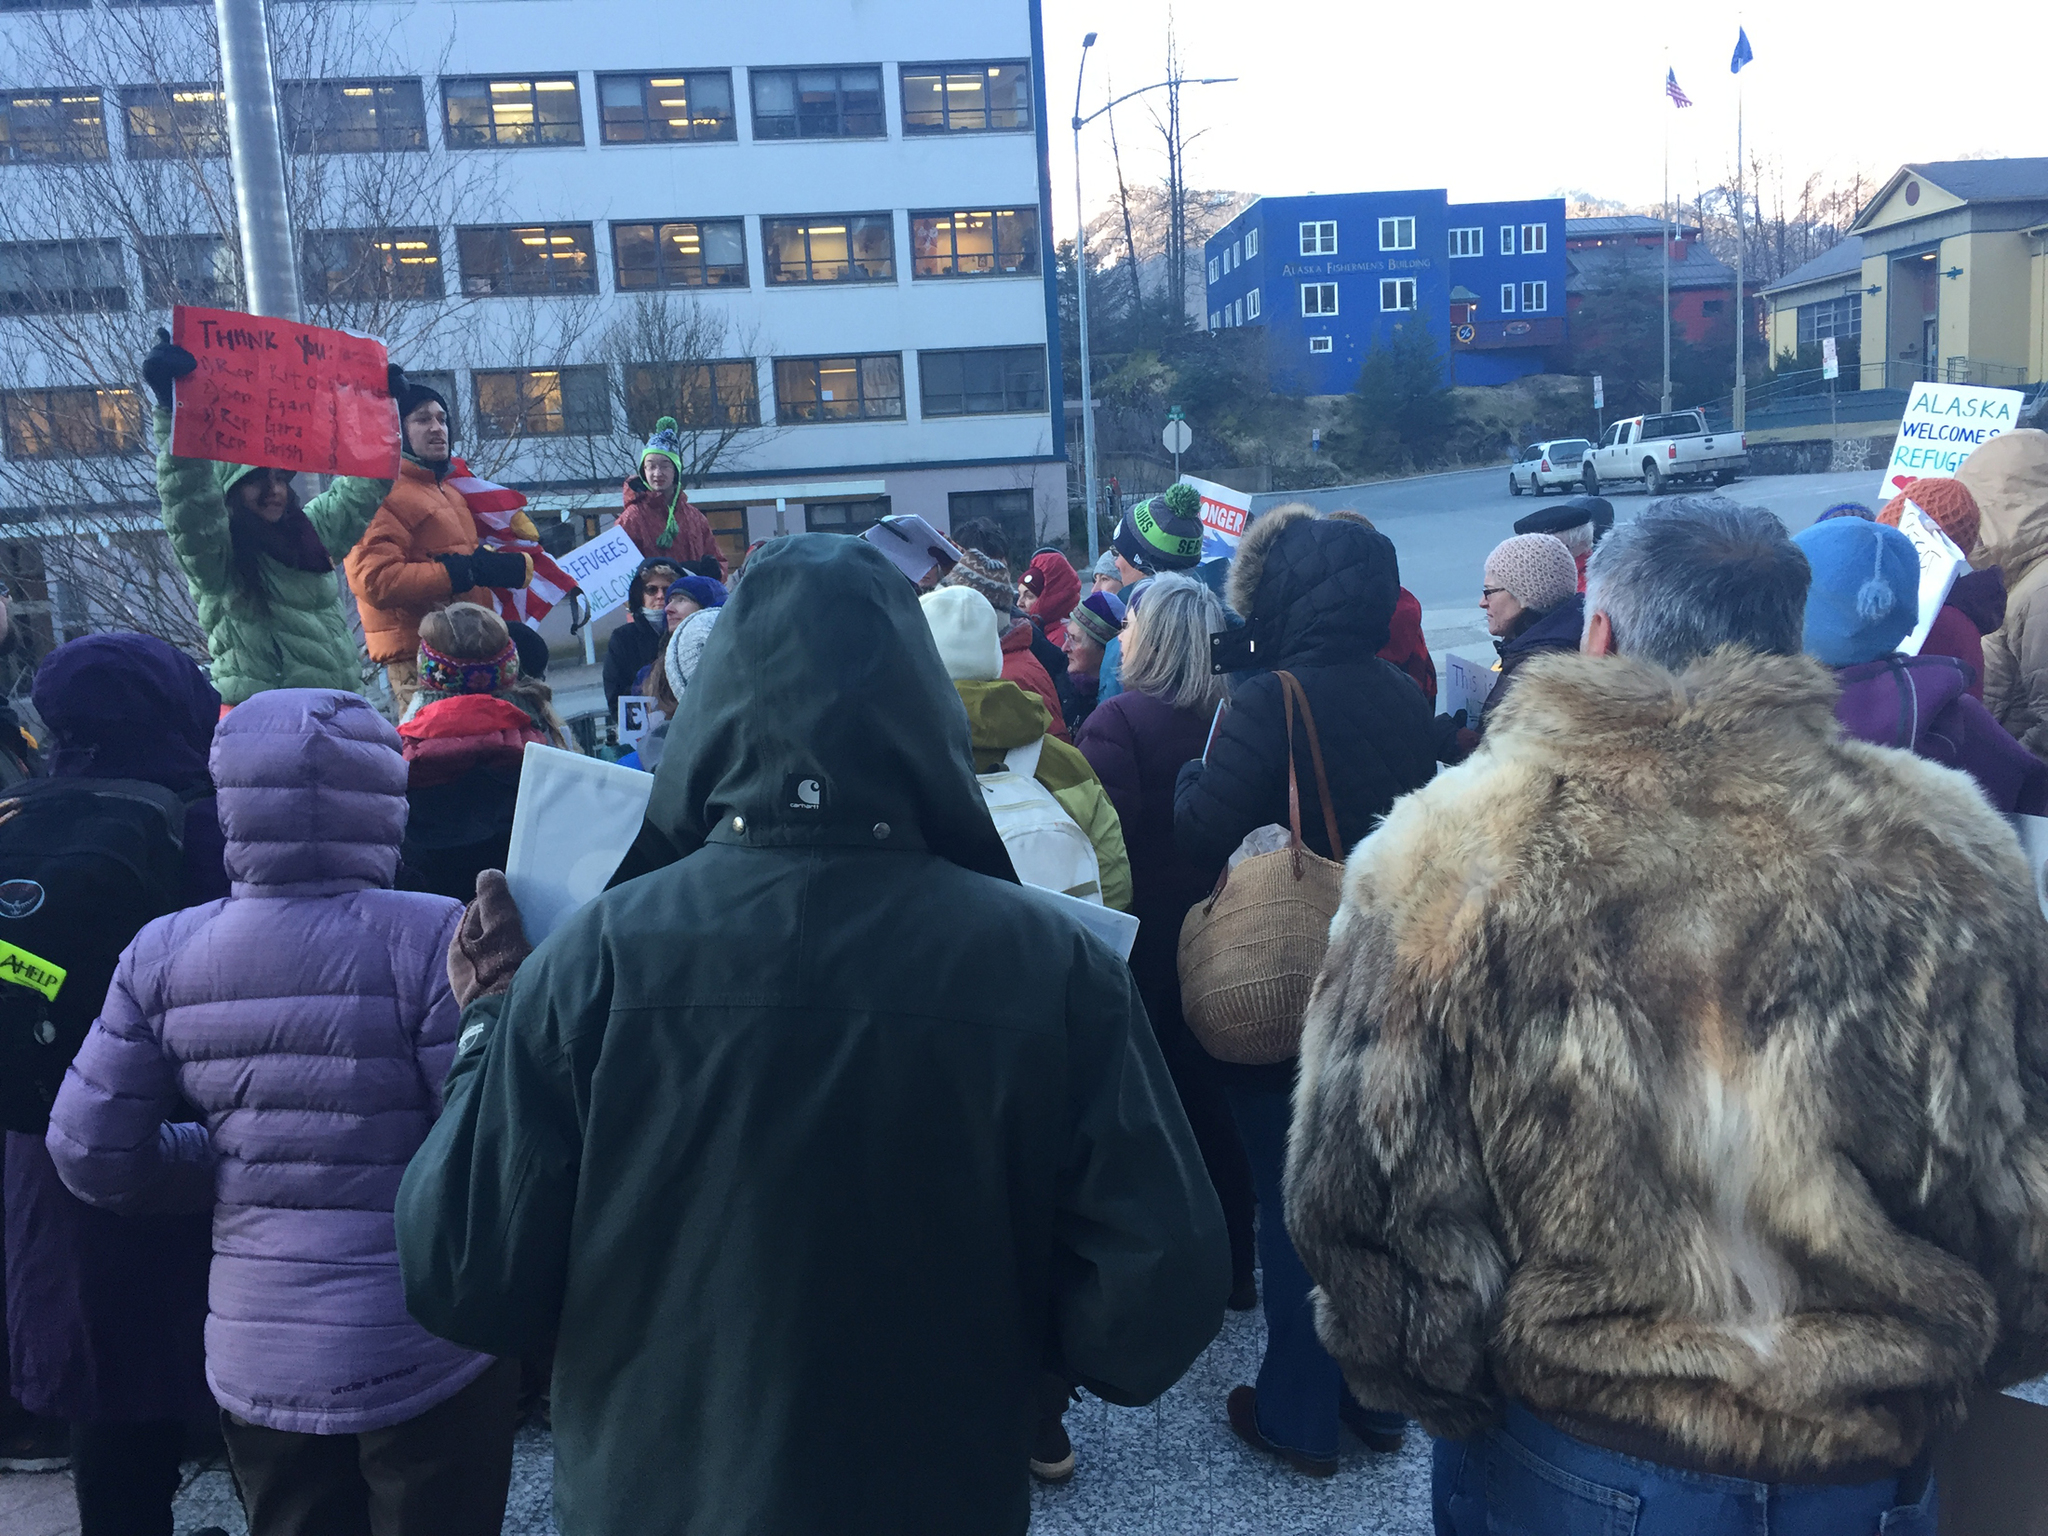 “Stand with Refugees and Immigrants” event organizers Jill Weitz (with red sign) and Daniel Kirkwood (orange jacket) speak with attendees prior to dispersing around 8:30 a.m. Monday. (Mary Catharine Martin | Juneau Empire)